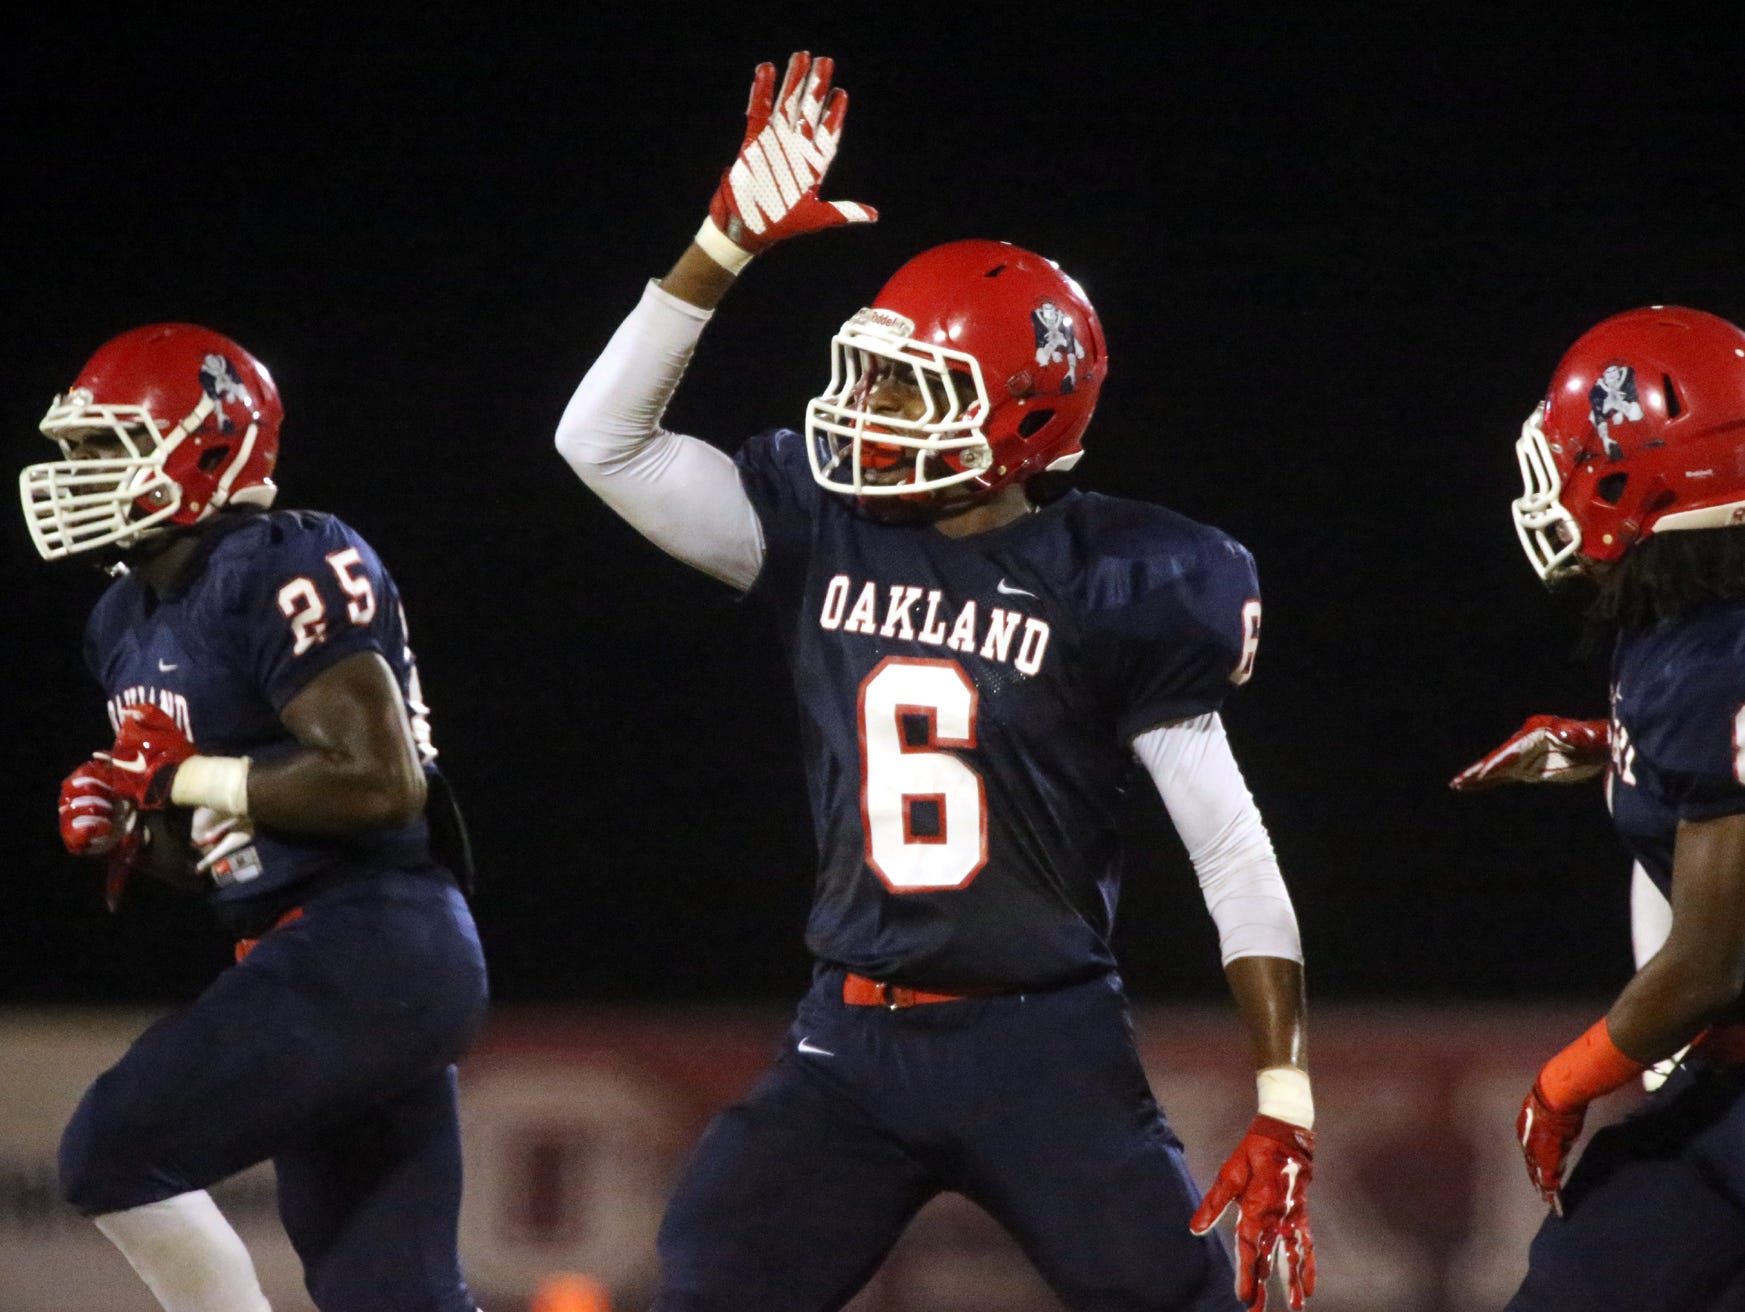 Oakland's Kaleb Oliver (6) celebrates making an interception during the game against Blackman. Oliver committed to Mississippi State on Wednesday.